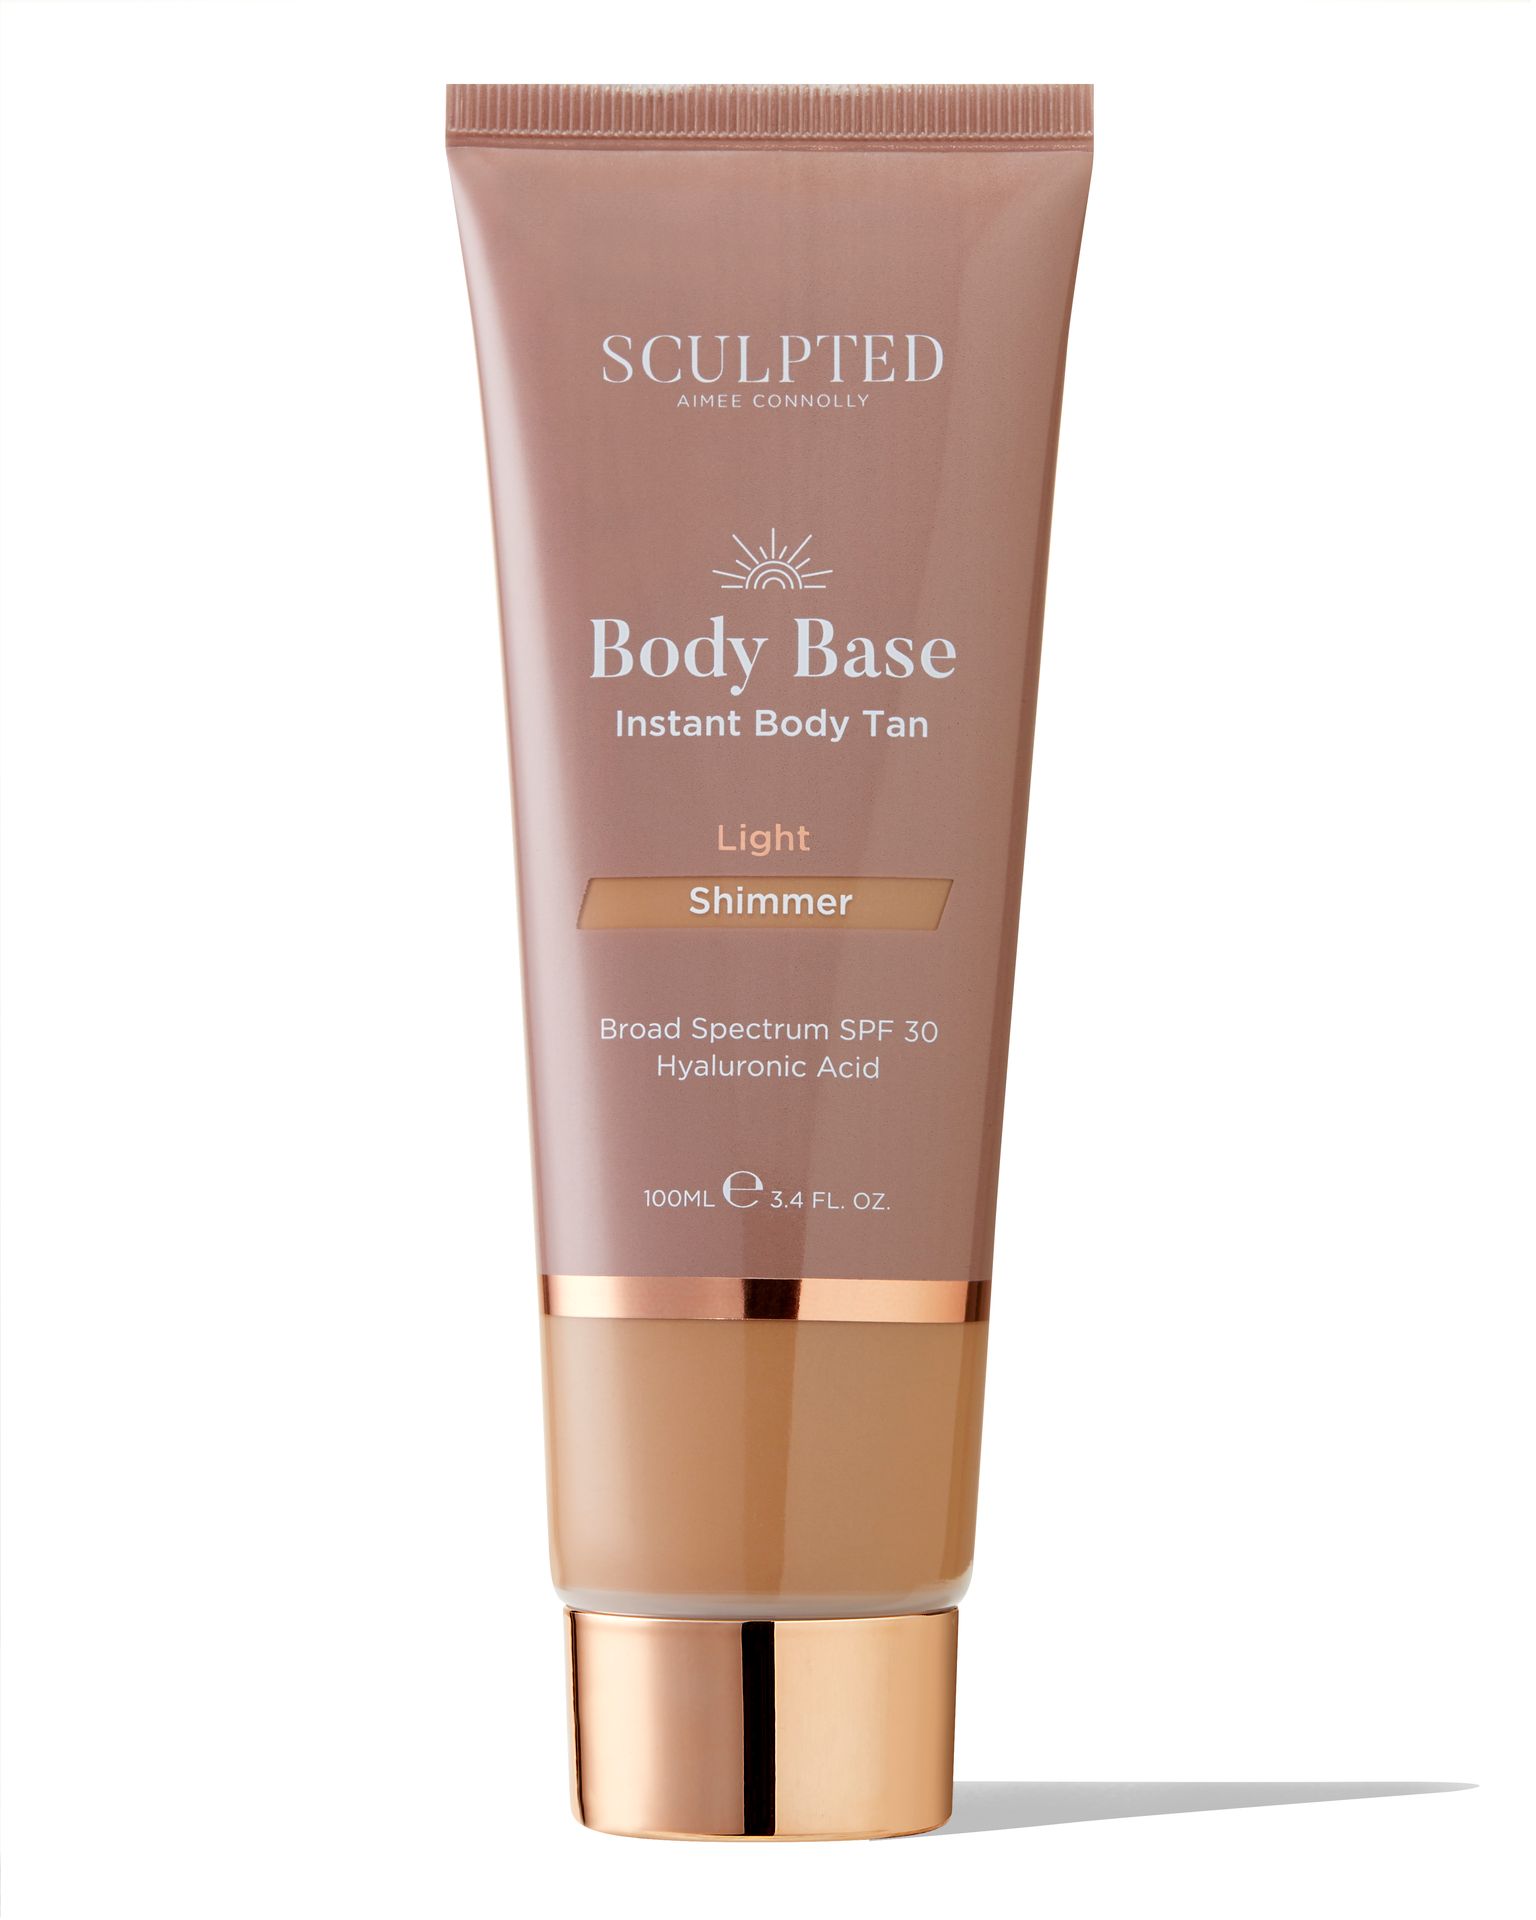 Sculpted By Aimee Connolly Body Base Instant Body Tan Shimmer Light